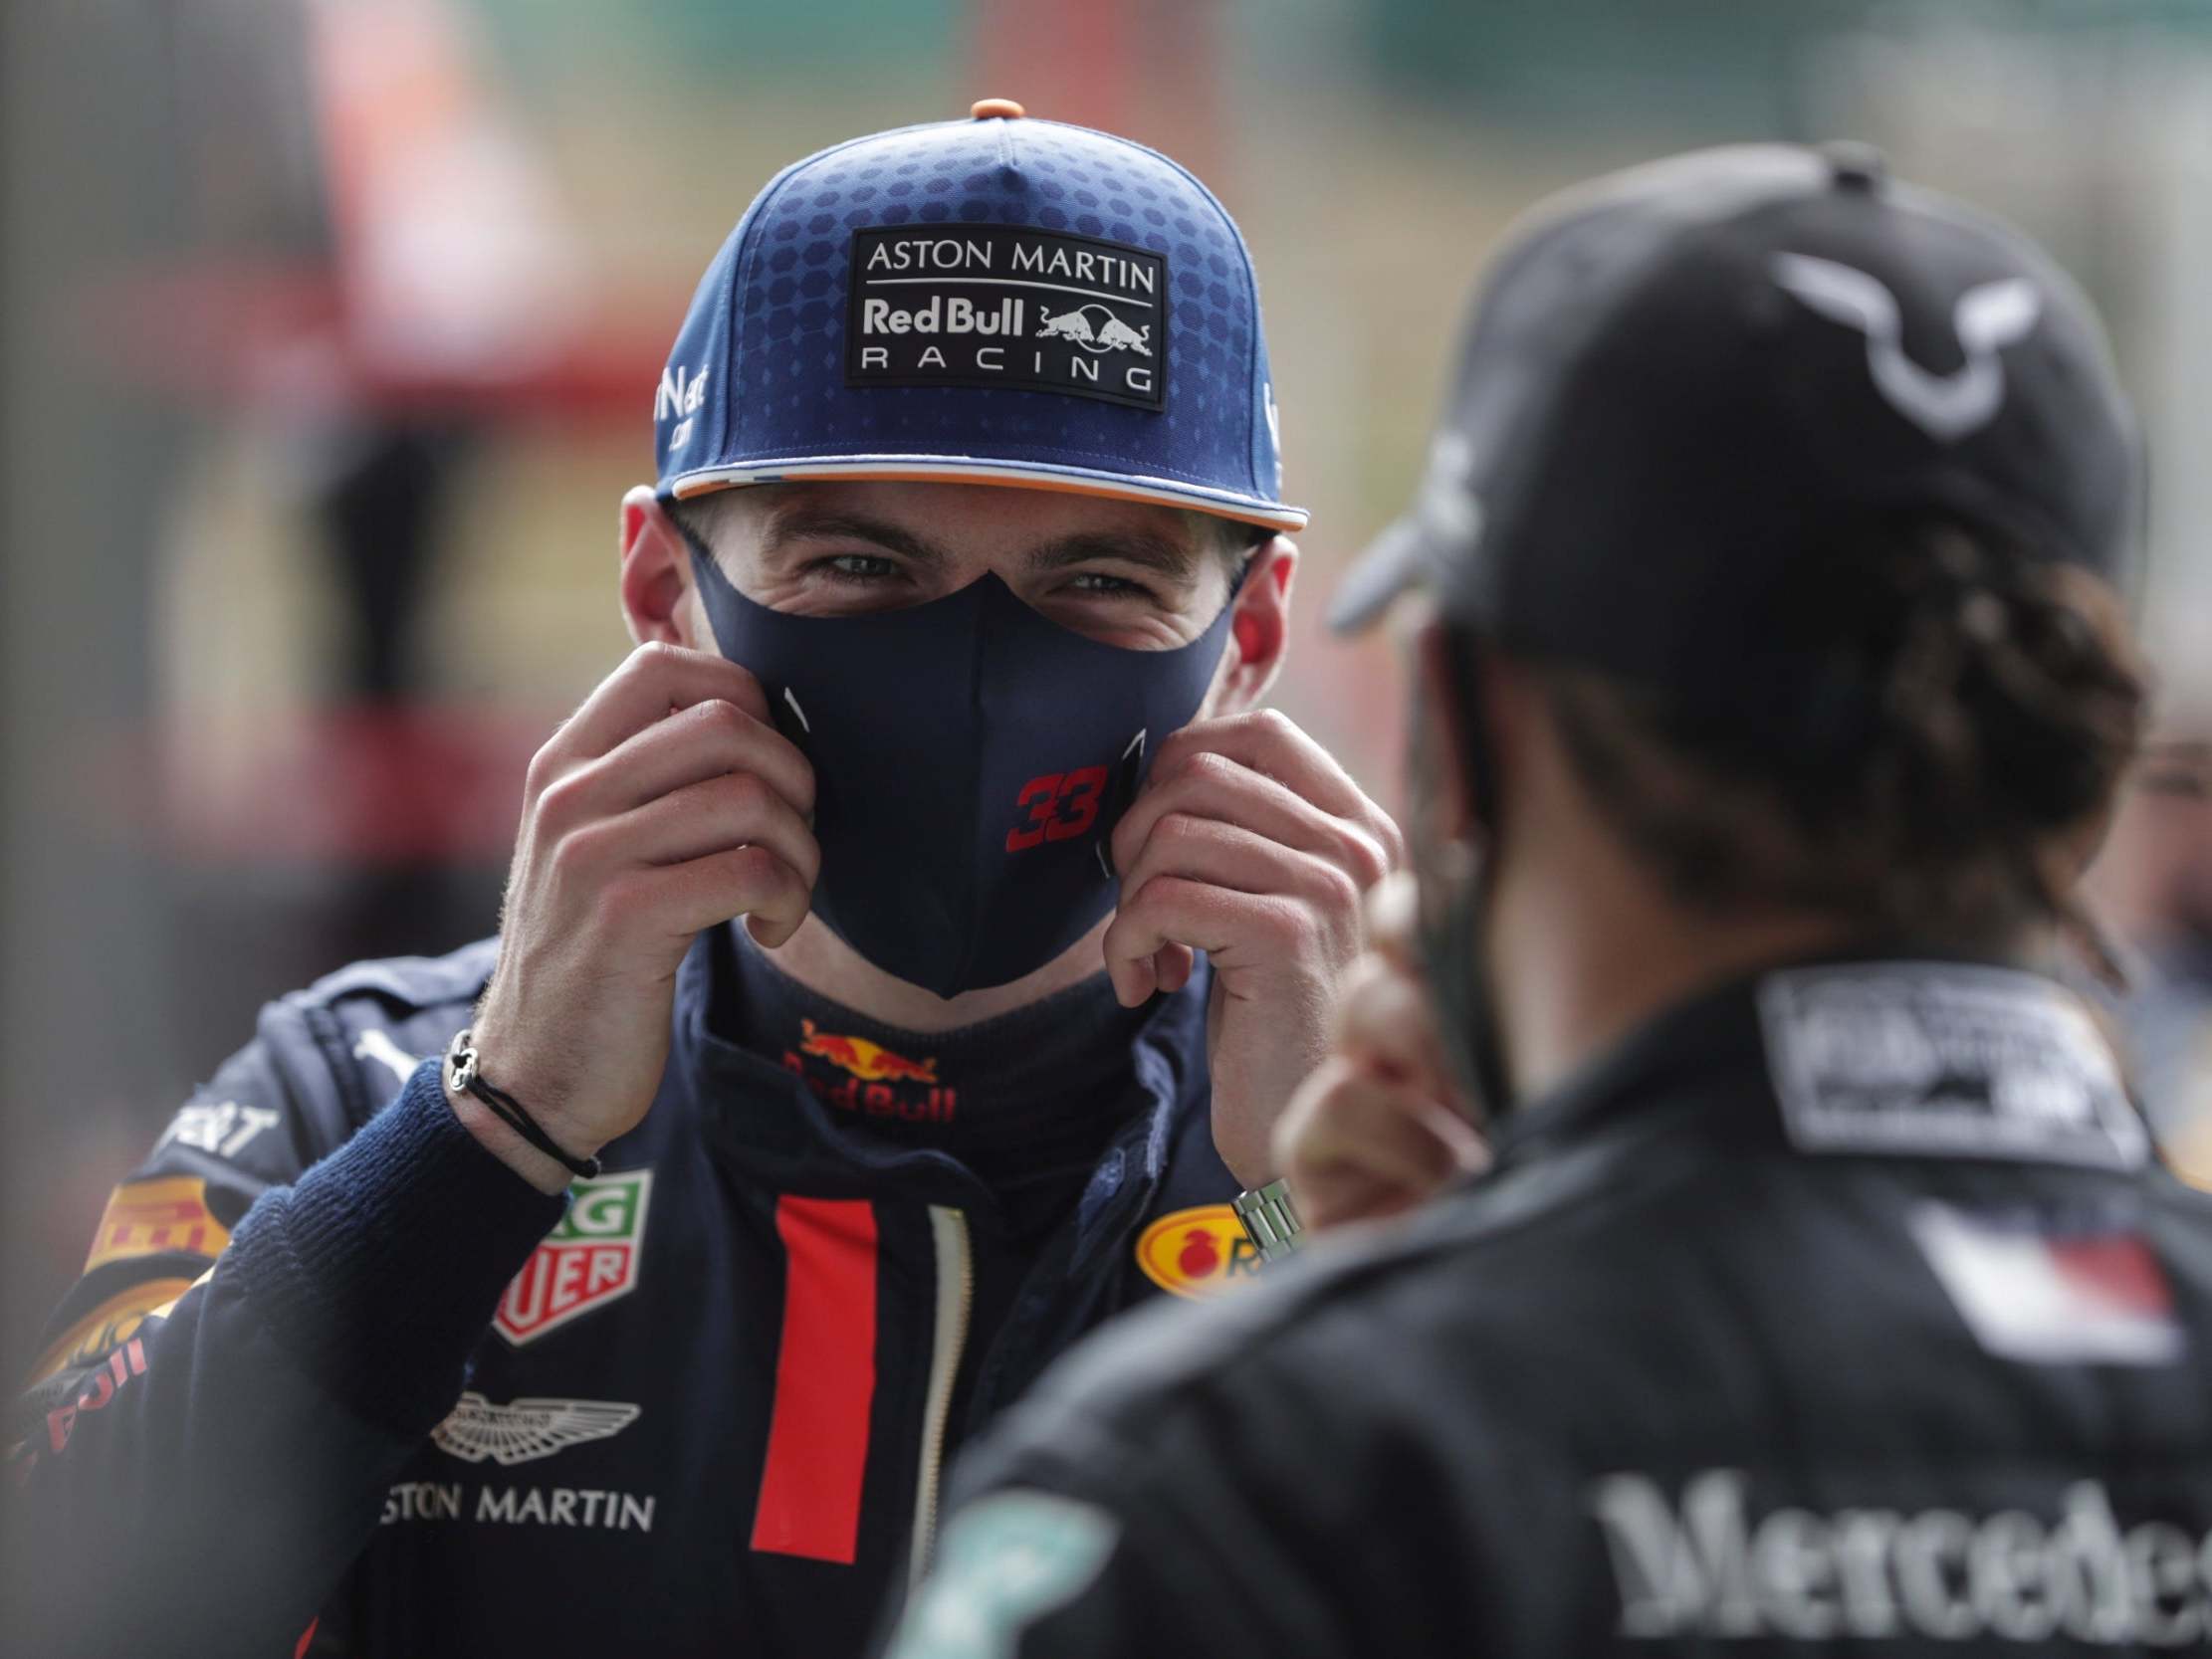 Max Verstappen labelled the Belgian Grand Prix 'boring' and 'not interesting'